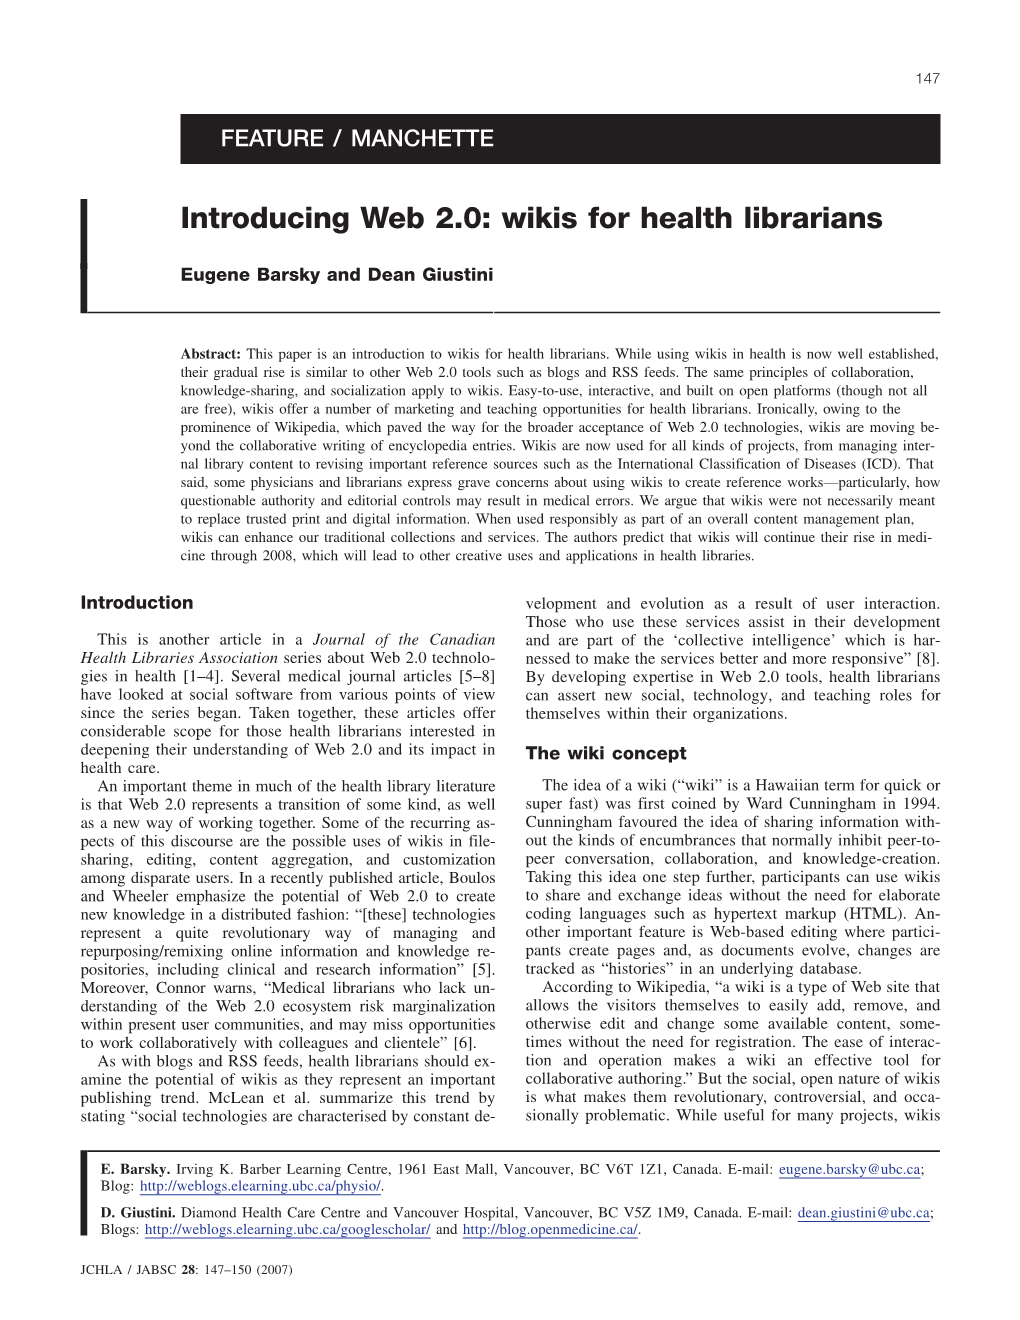 Wikis for Health Librarians